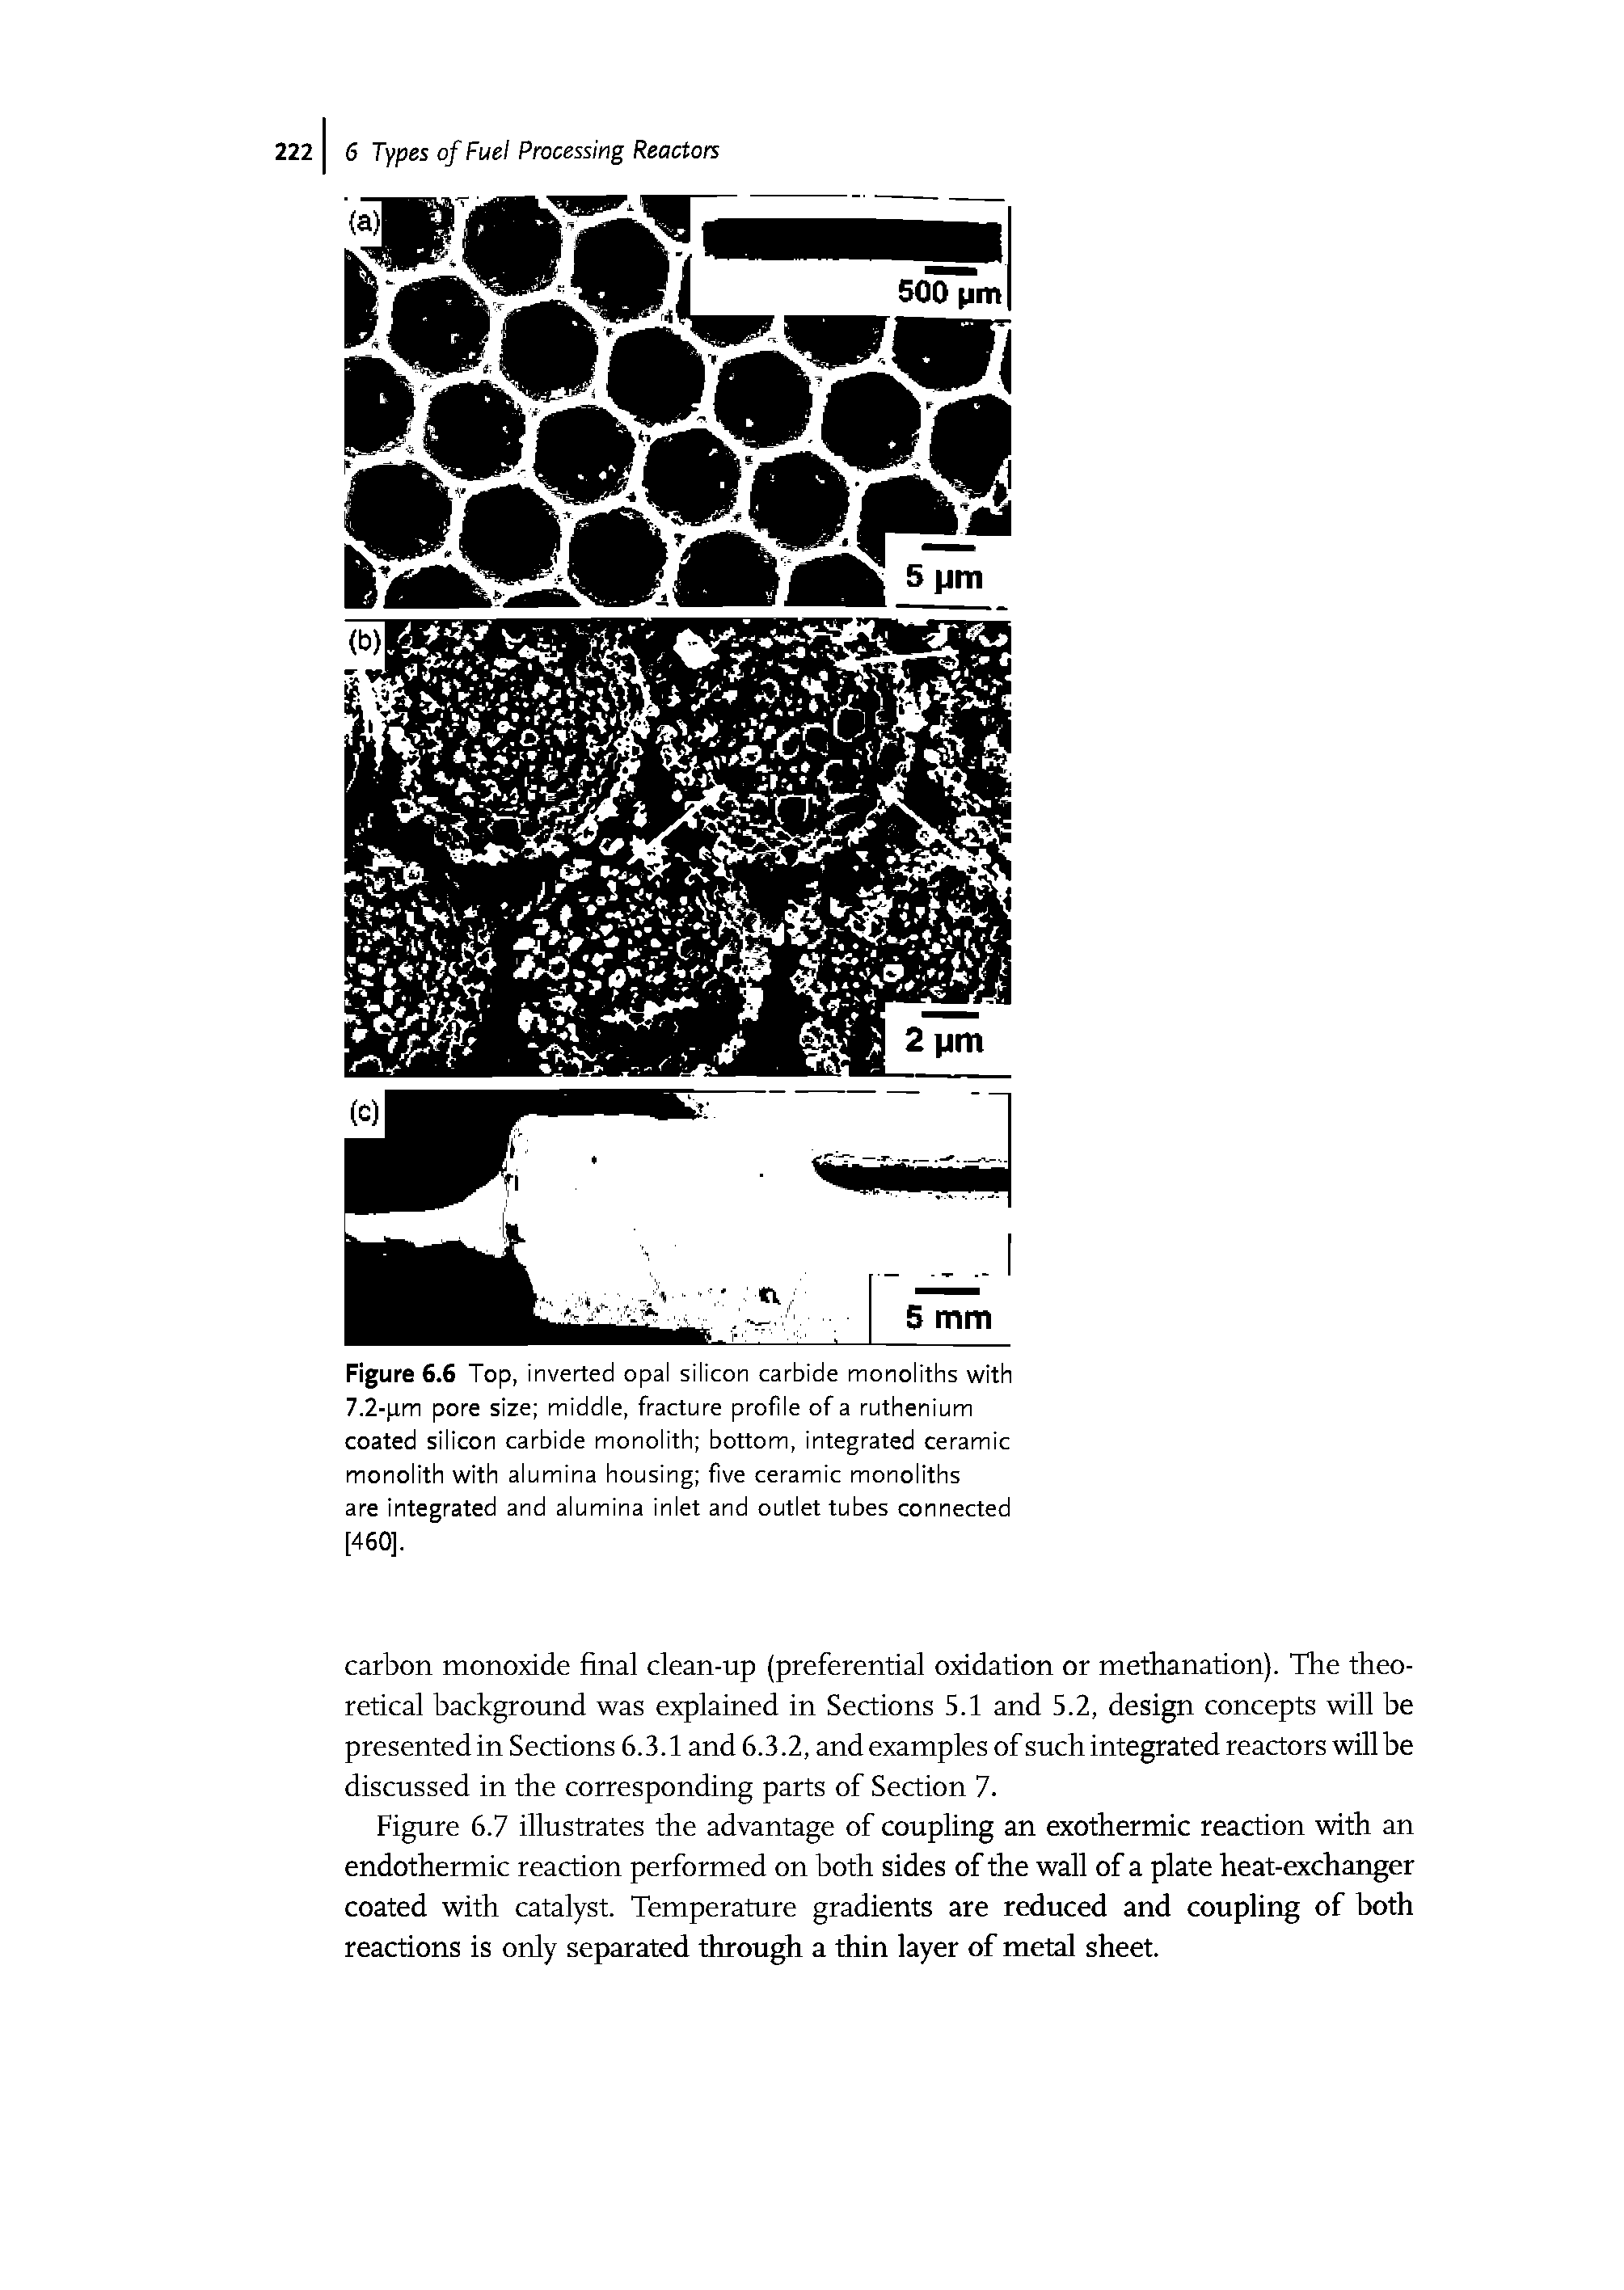 Figure 6.6 Top, inverted opal silicon carbide monoliths with 7,2-pm pore size middle, fracture profile of a ruthenium coated silicon carbide monolith bottom, integrated ceramic monolith with alumina housing five ceramic monoliths are integrated and alumina inlet and outlet tubes connected [460],...